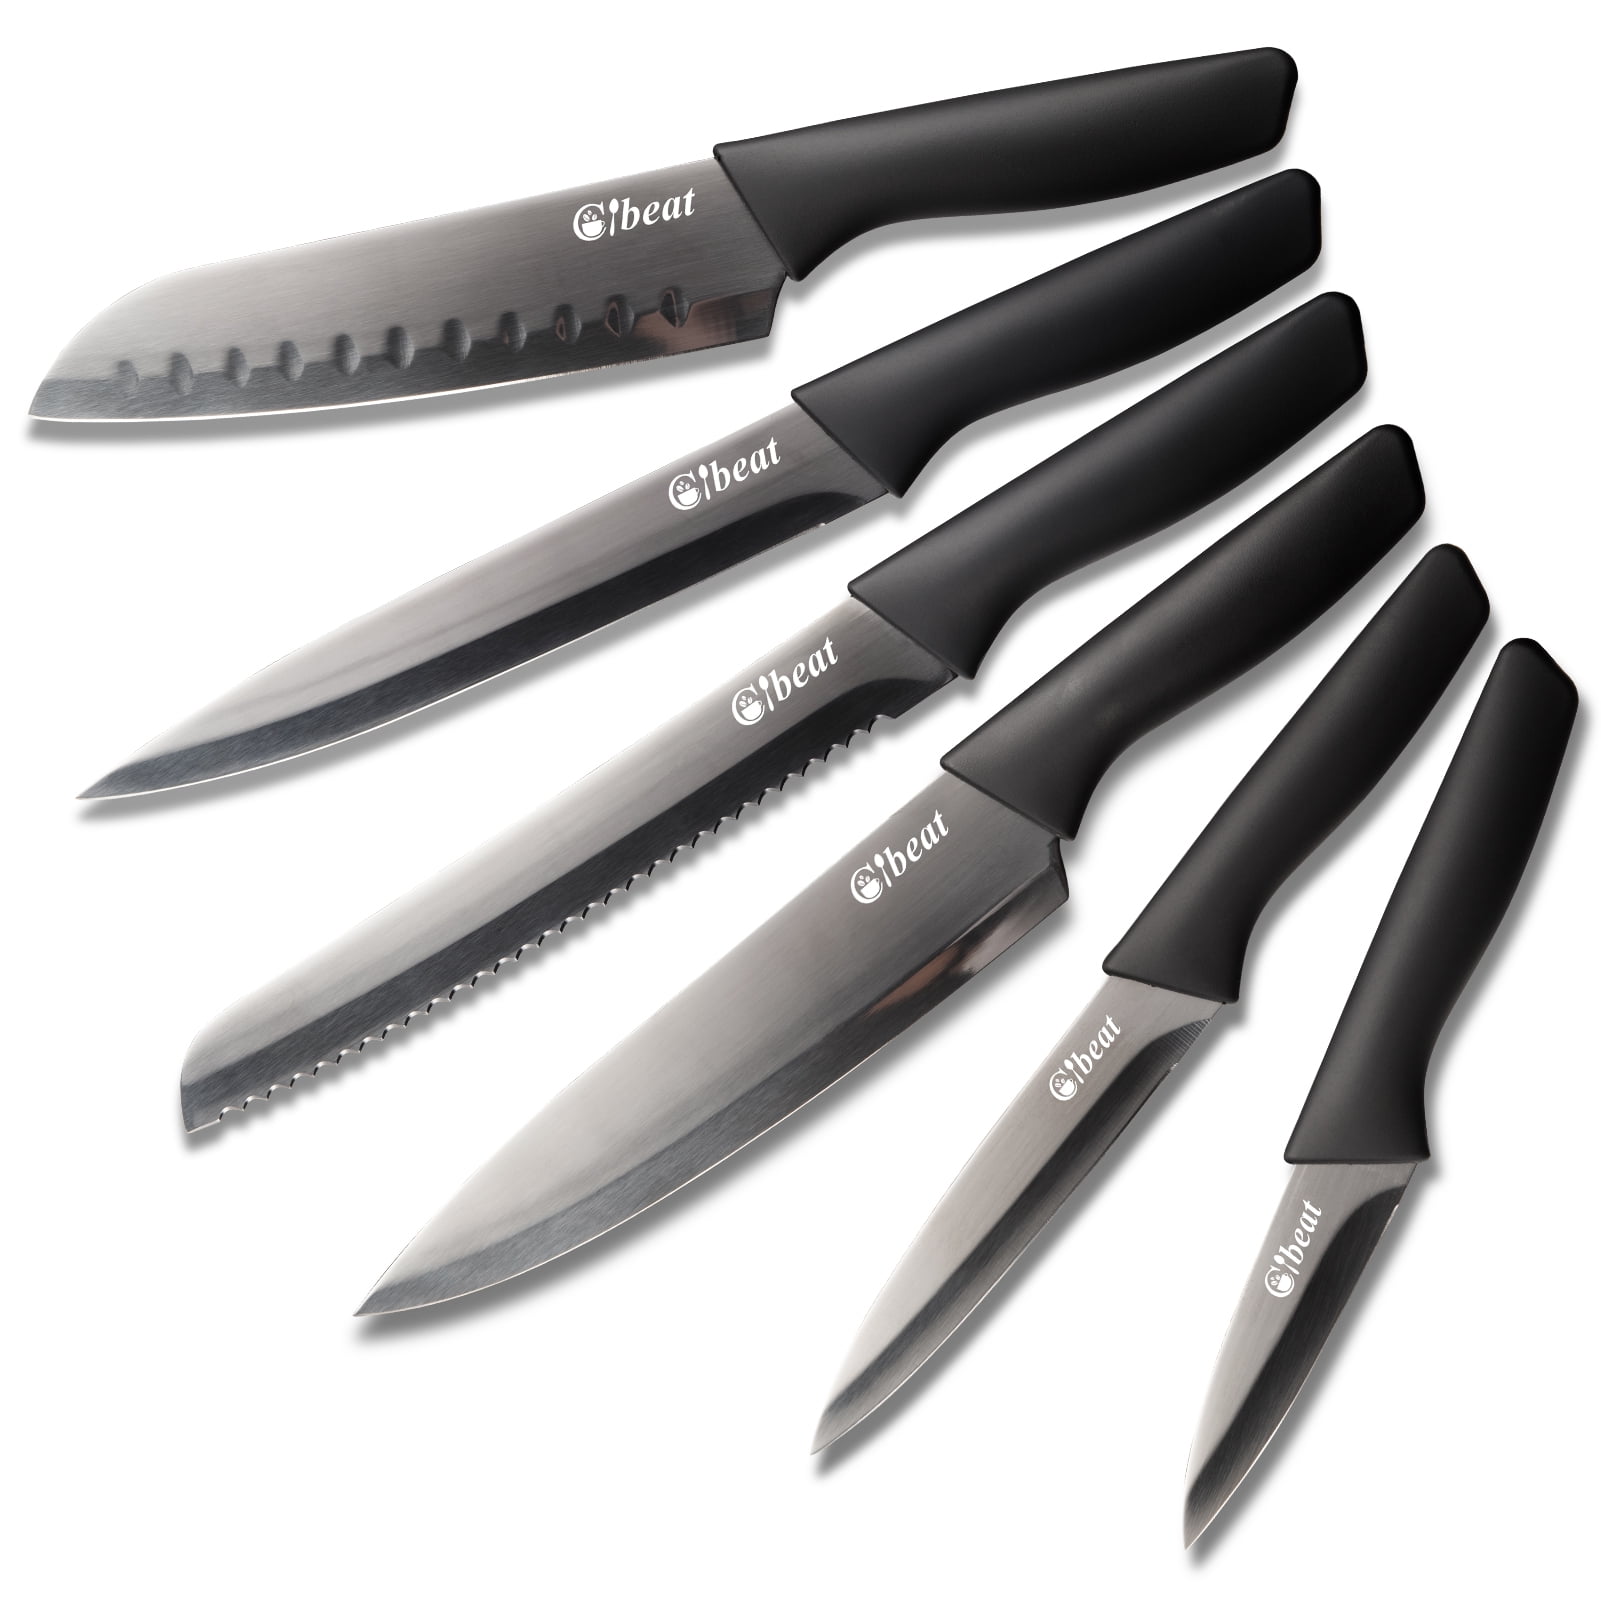 4pcs Kitchen Knife Set Professional Chef’s Knives Sharp Stainless Steel  Blades